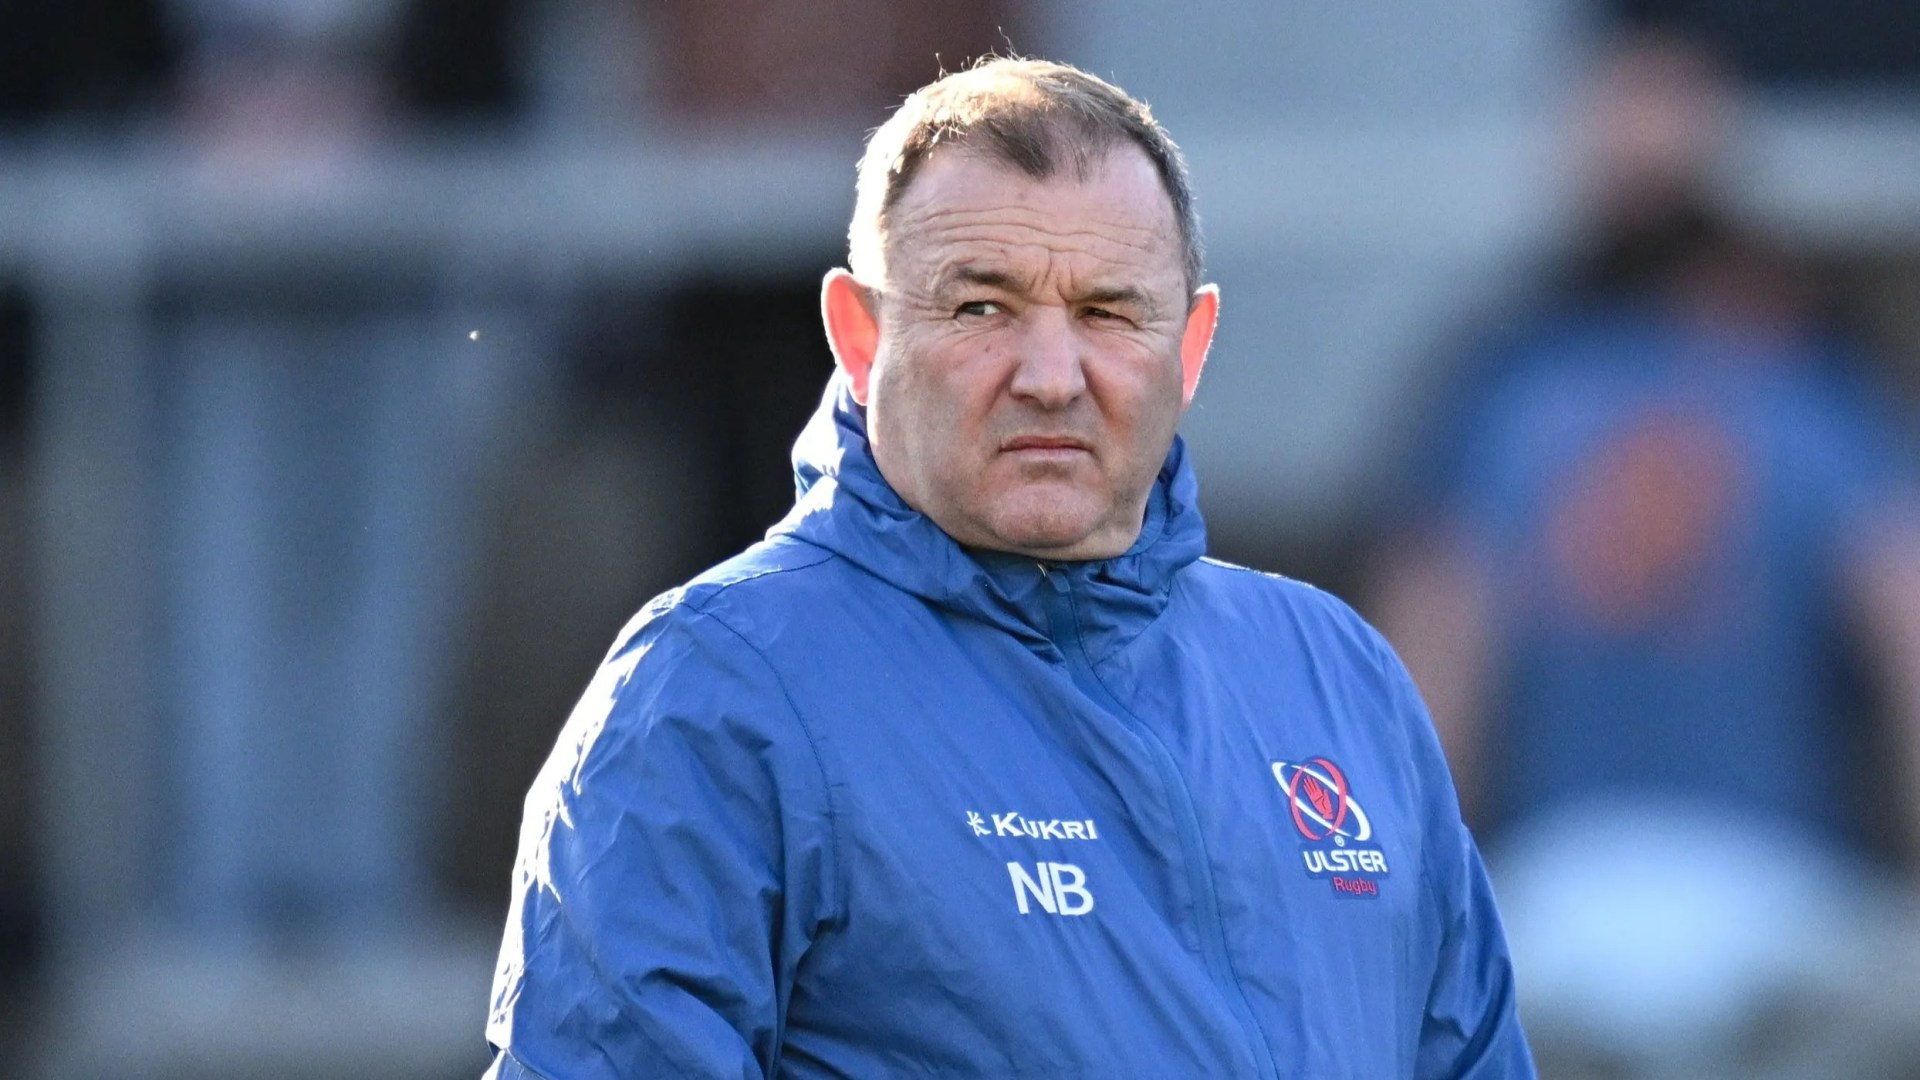 Richie Murphy agrees permanent deal as Ulster head coach with Ireland Under 20s replacement boss named [Video]